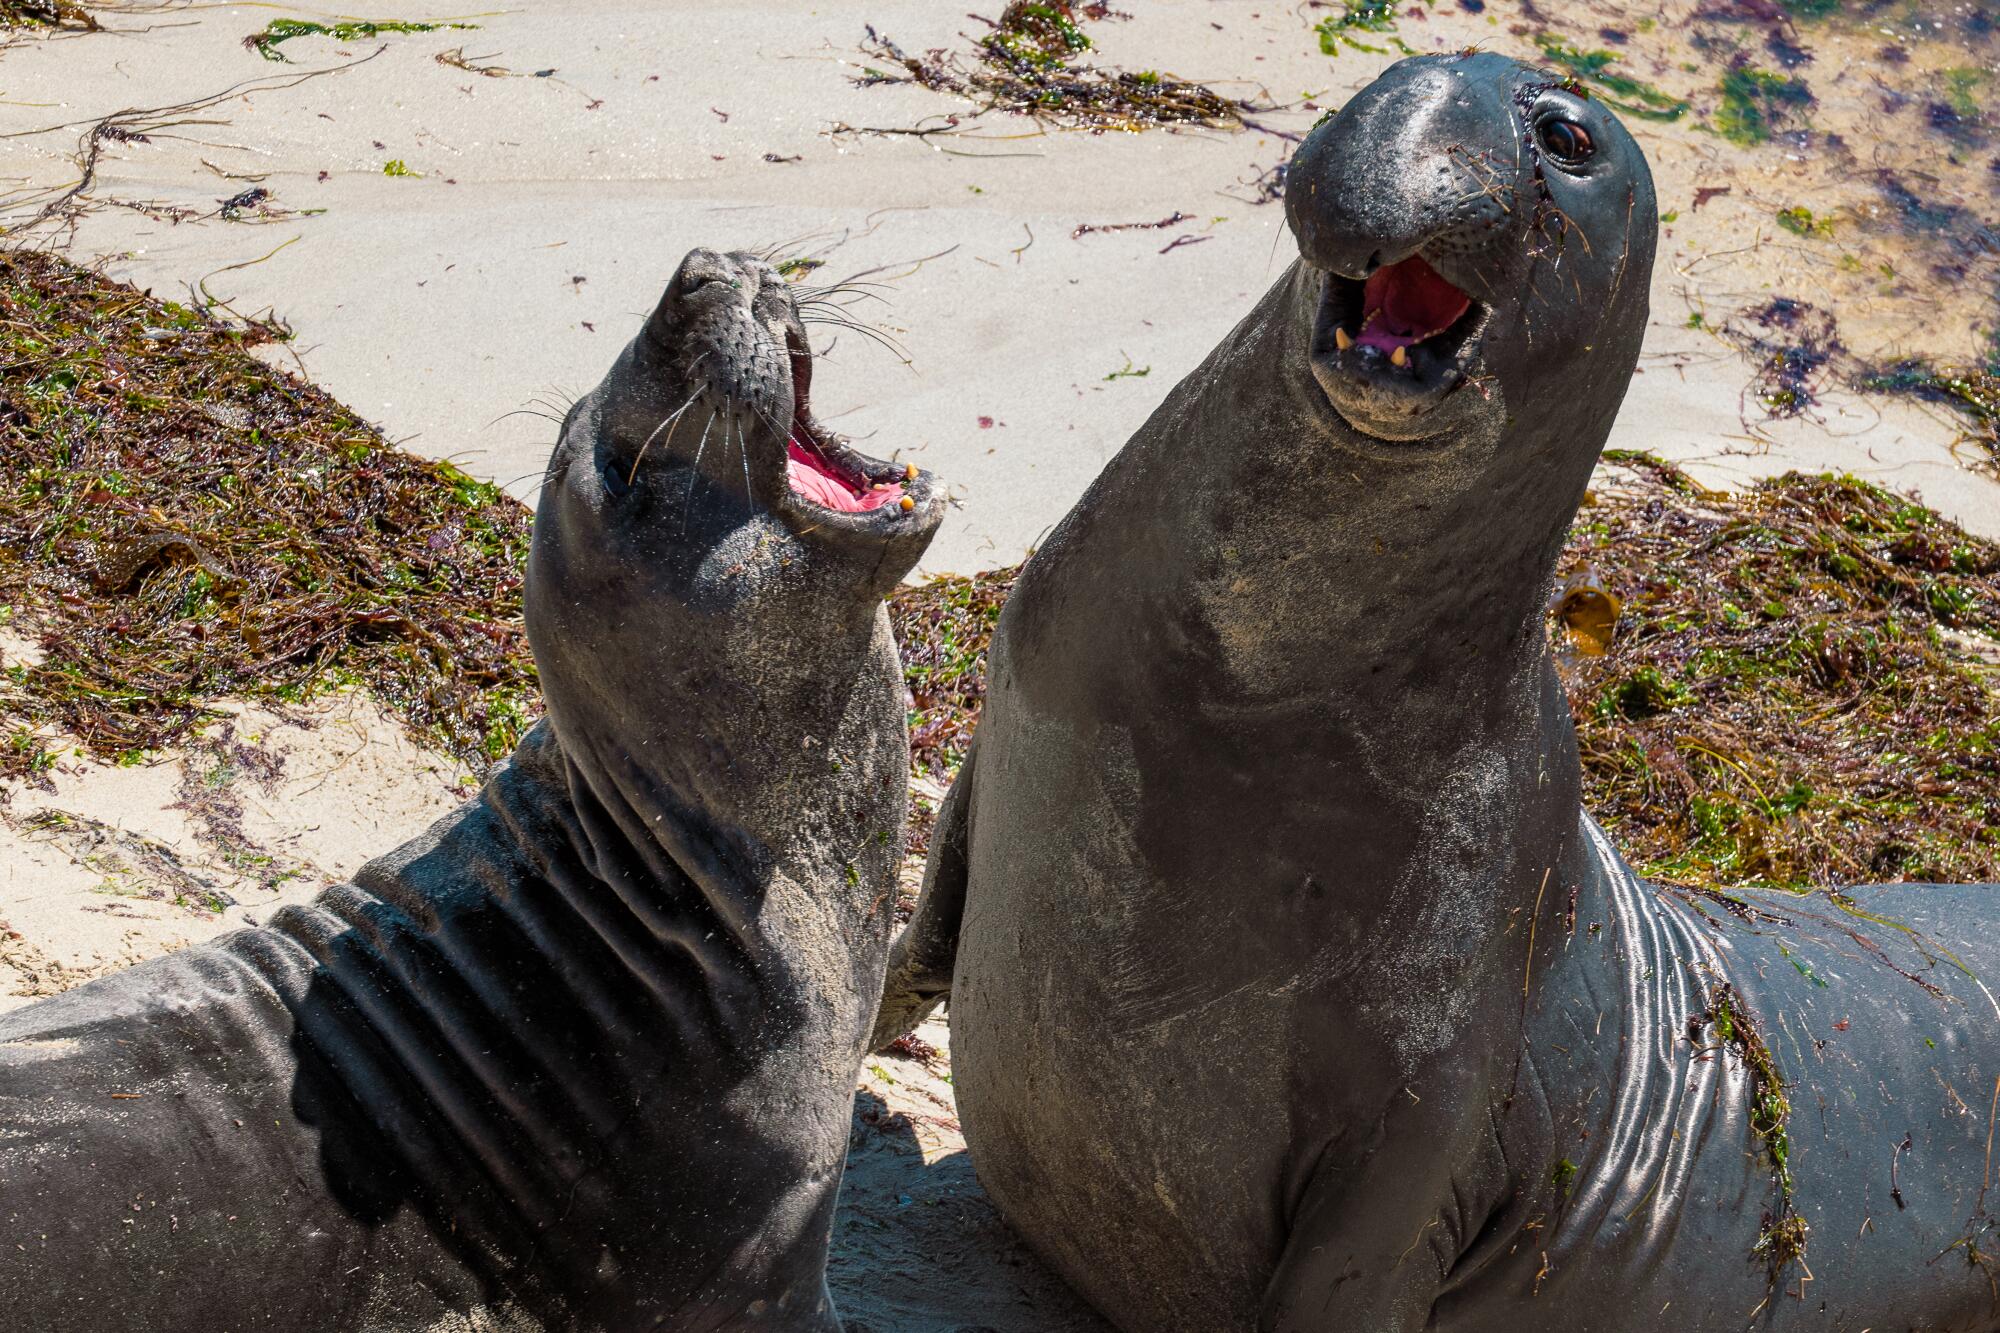 Juvenile elephant seals open their mouths while on the beach. 